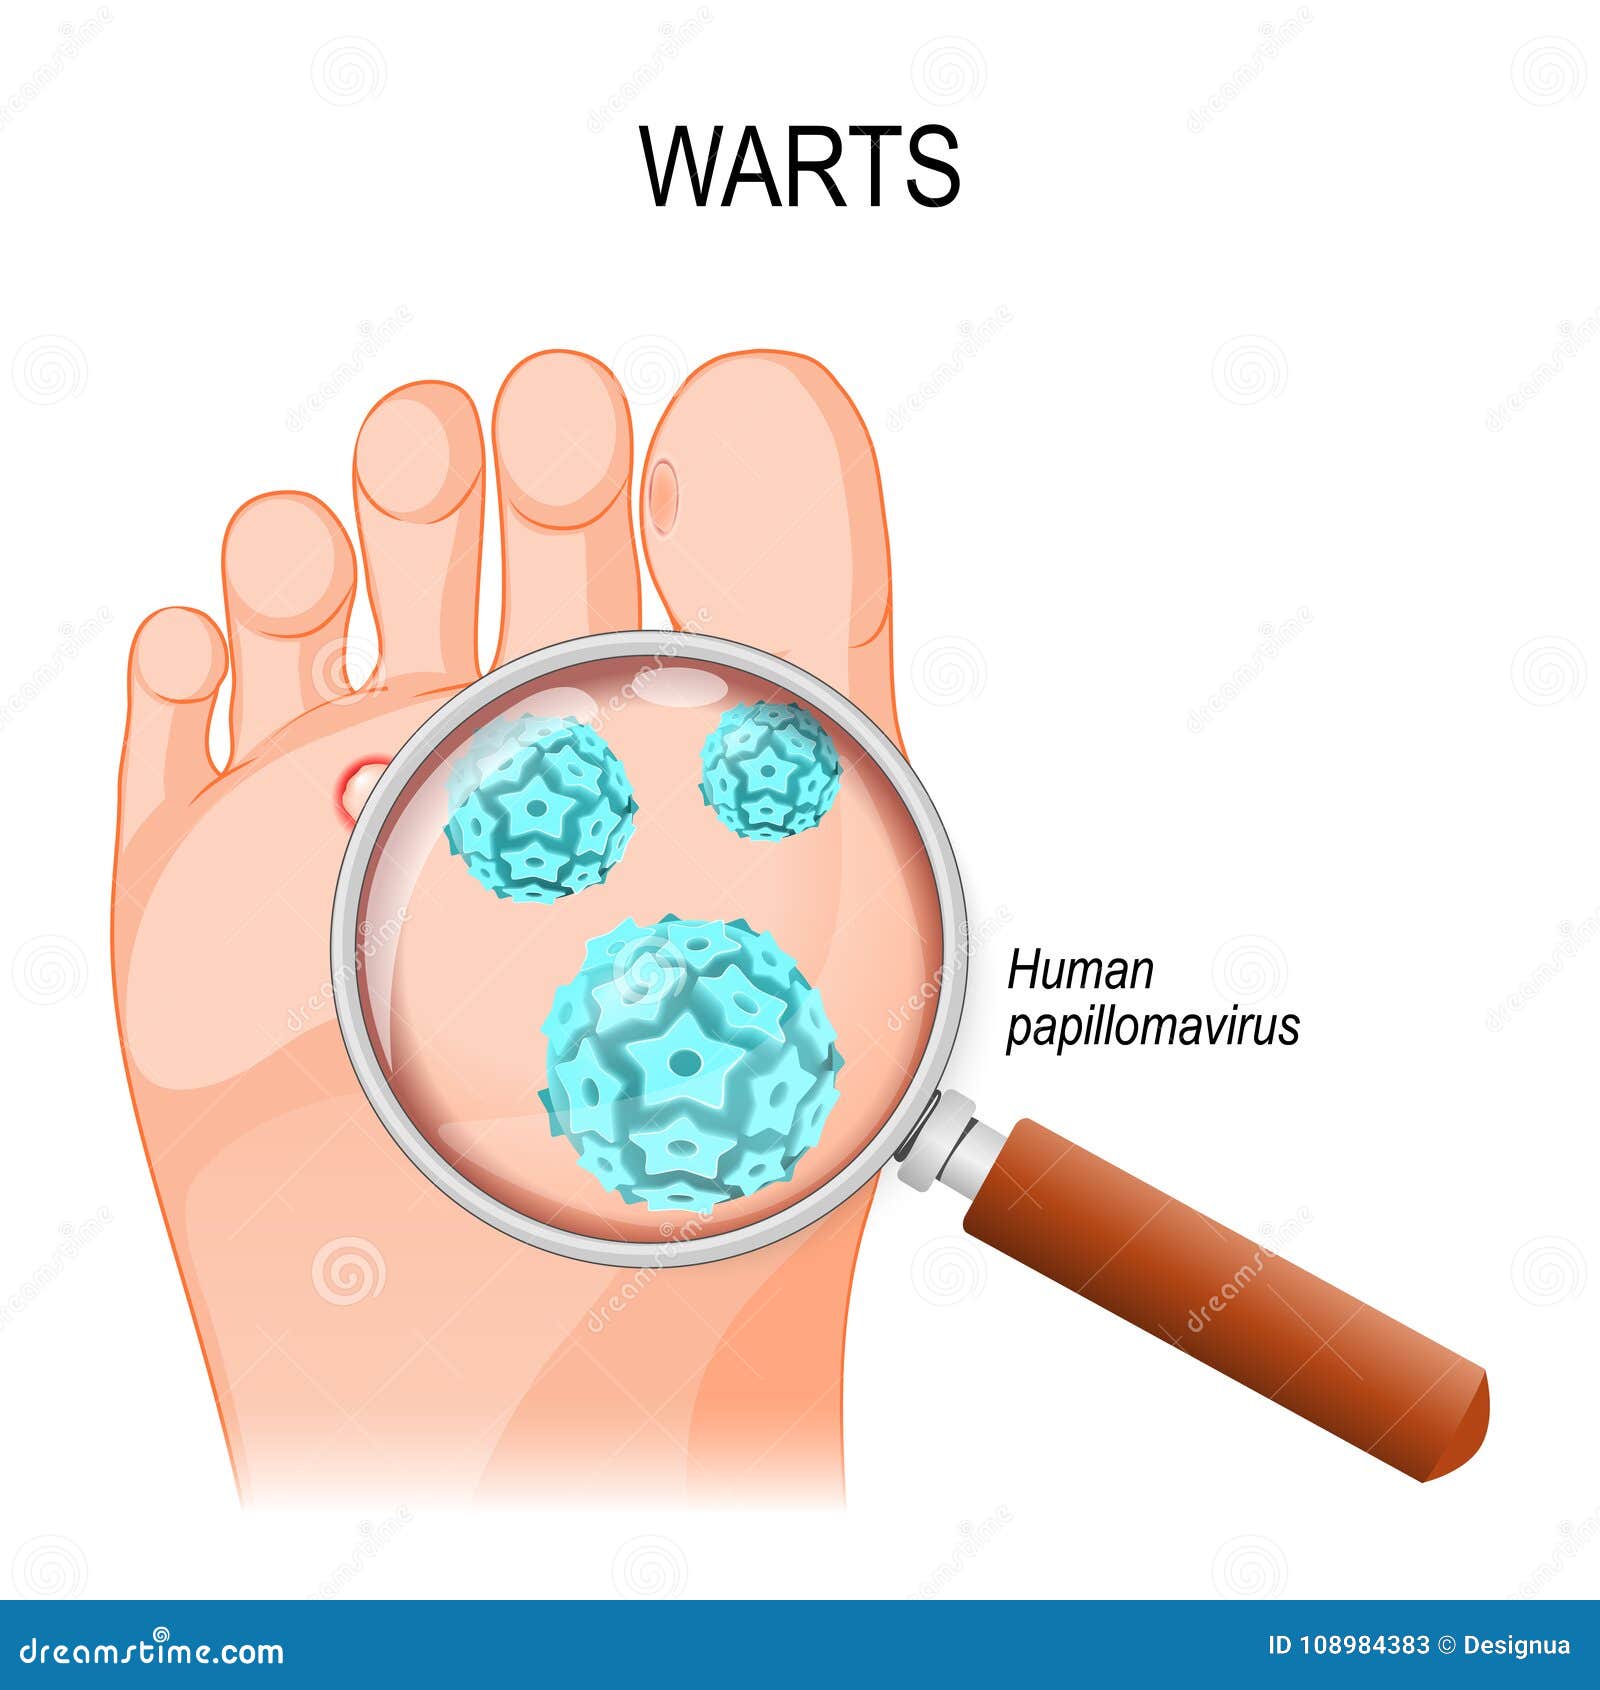 Hpv that causes warts on feet. Hpv foot wart treatment Hpv virus and warts on feet